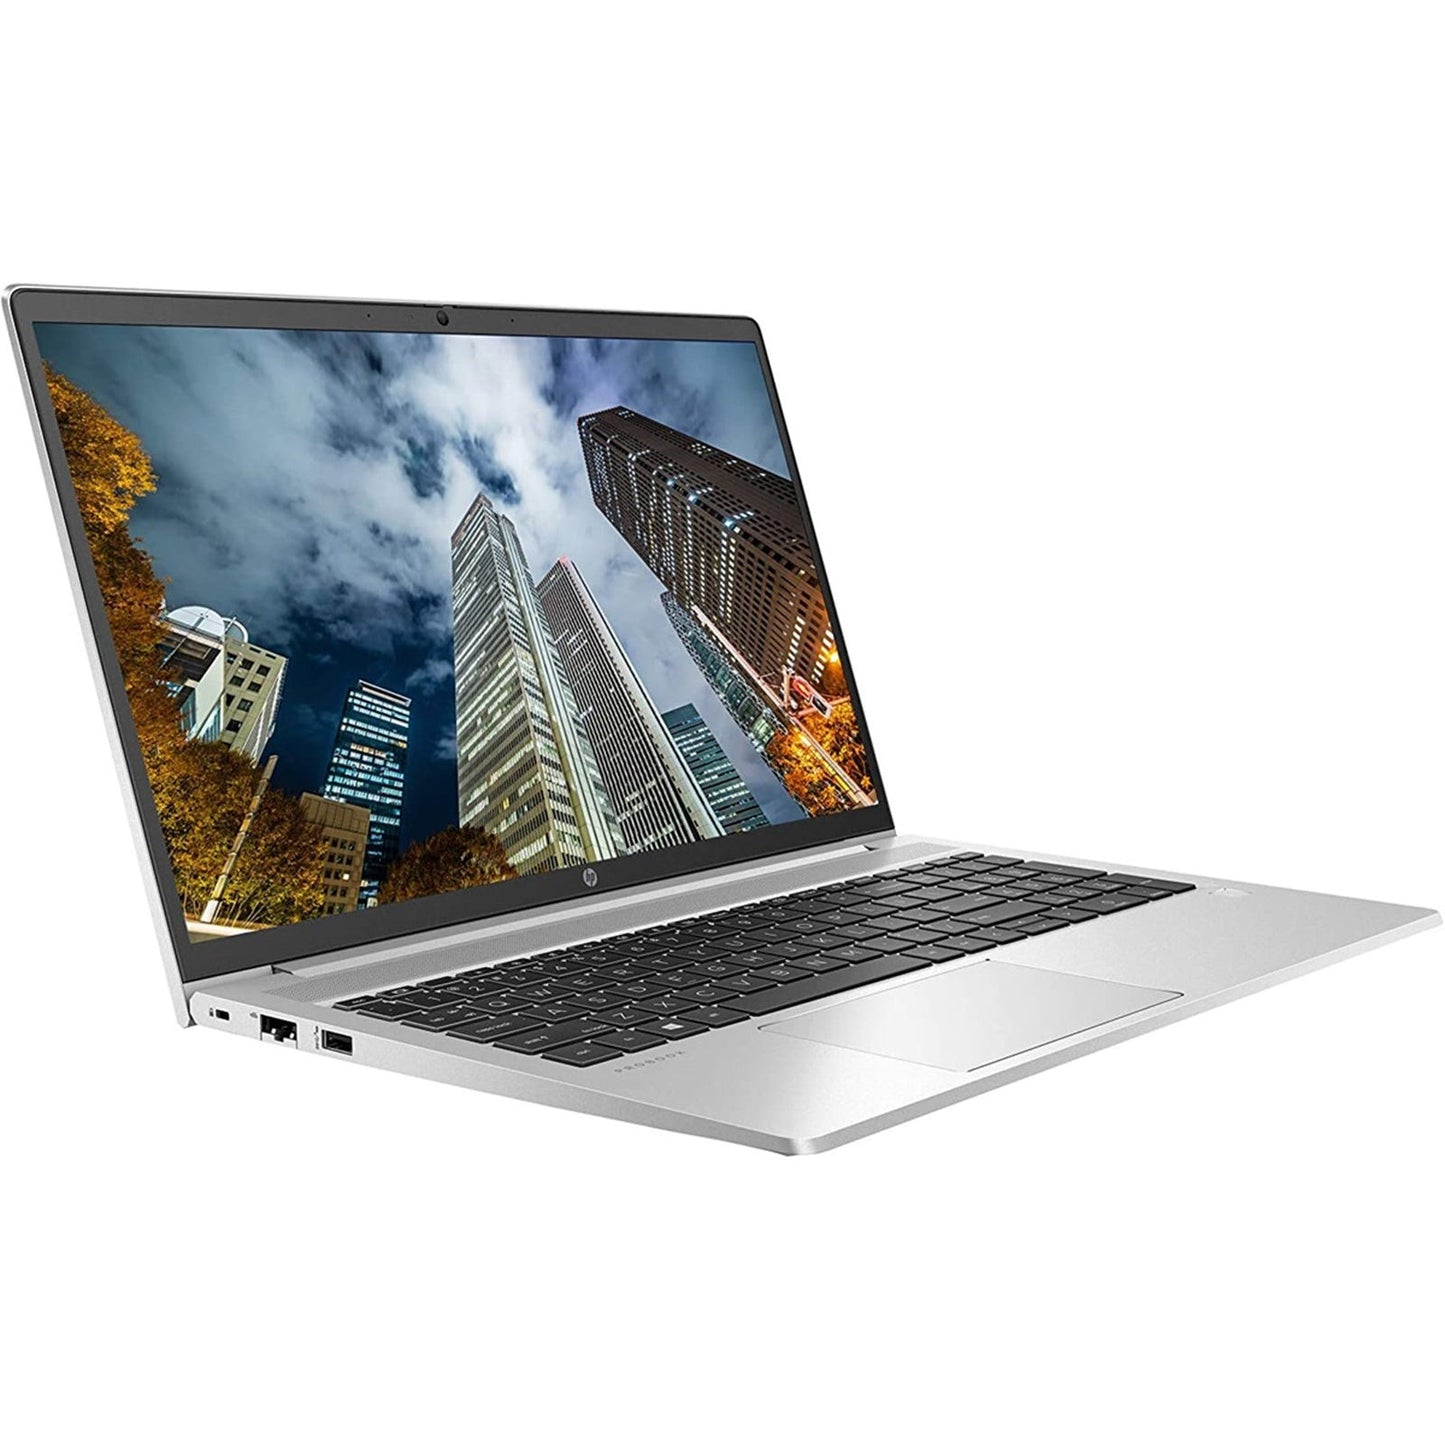 HP ProBook 455 G9 NEW Ryzen 5 5Gen 6-Core Business Class & Protected by HP Wolf Security w/ IPS Full HD Display